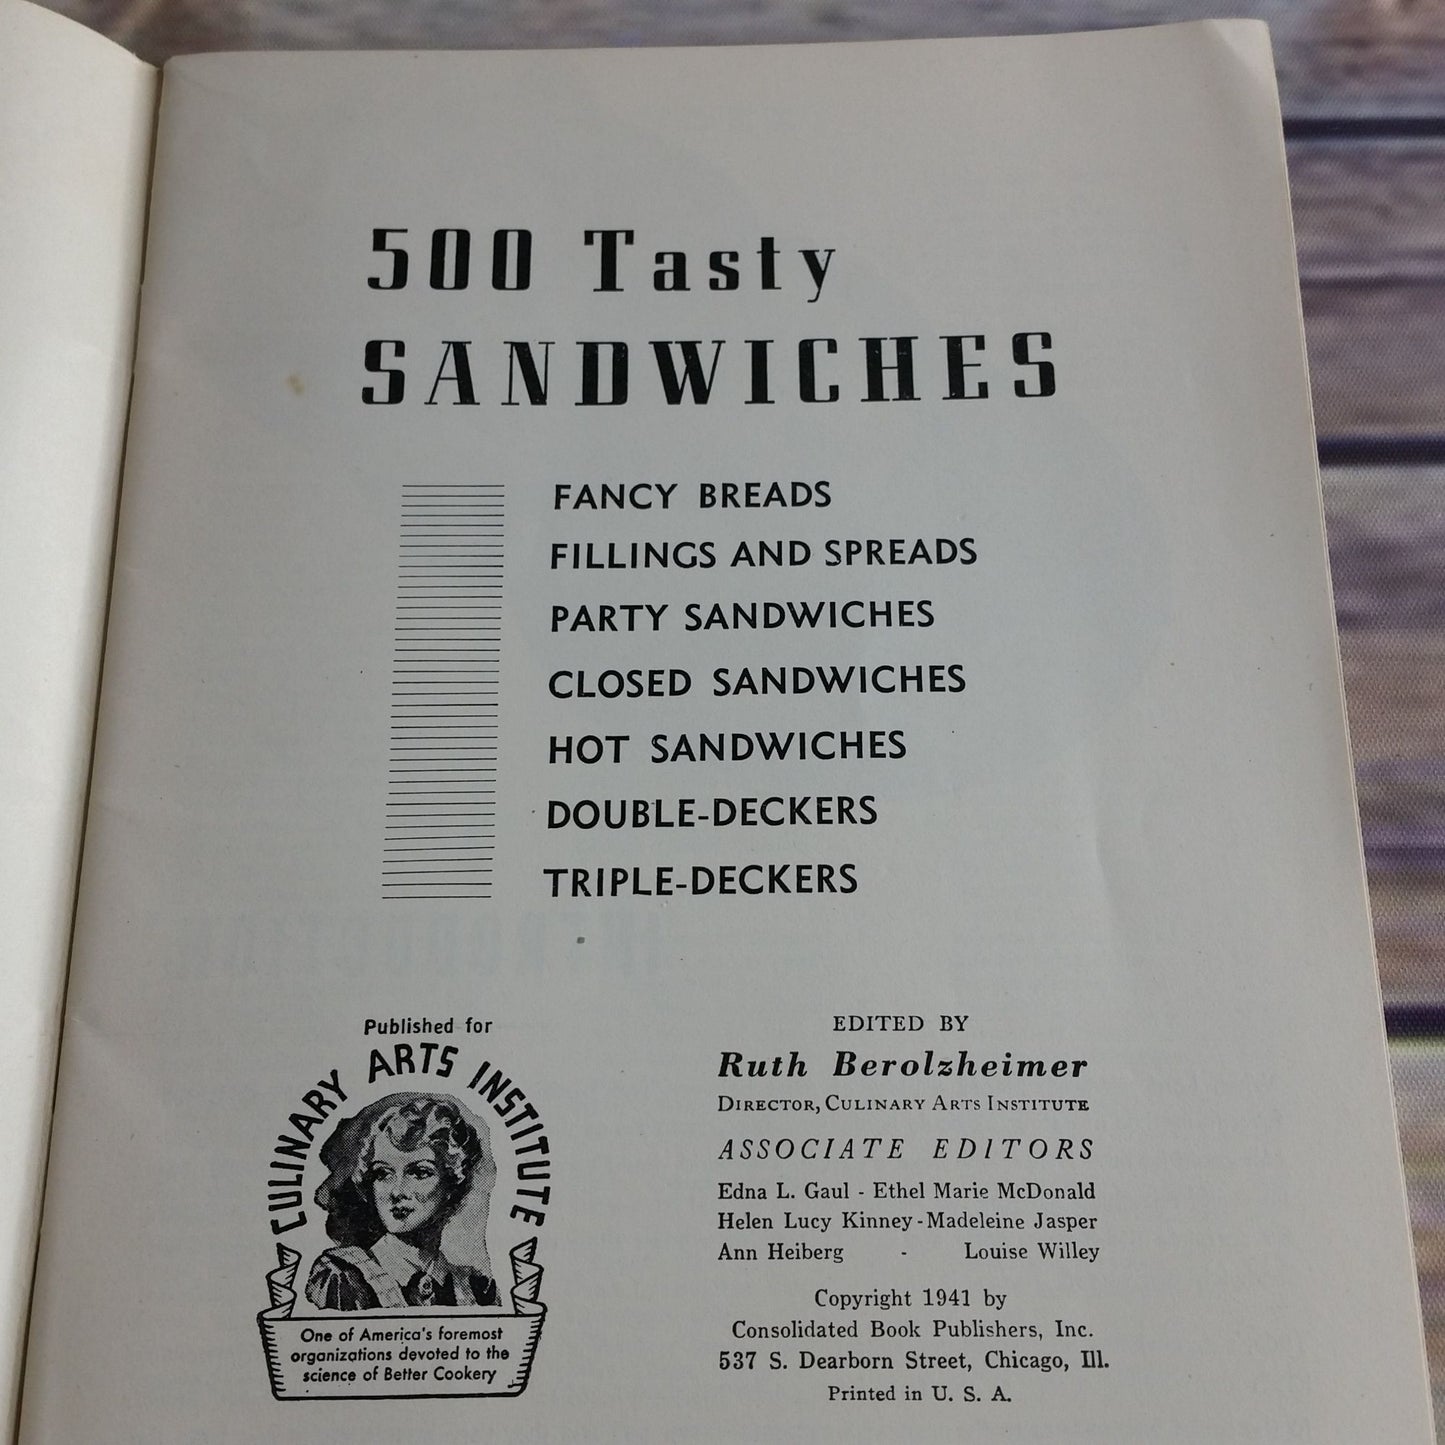 Vintage Cookbook 500 Tasty Sandwiches Recipes Culinary Arts Institute 1941 Ruth Berolzheimer Paperback Booklet Pamphlet